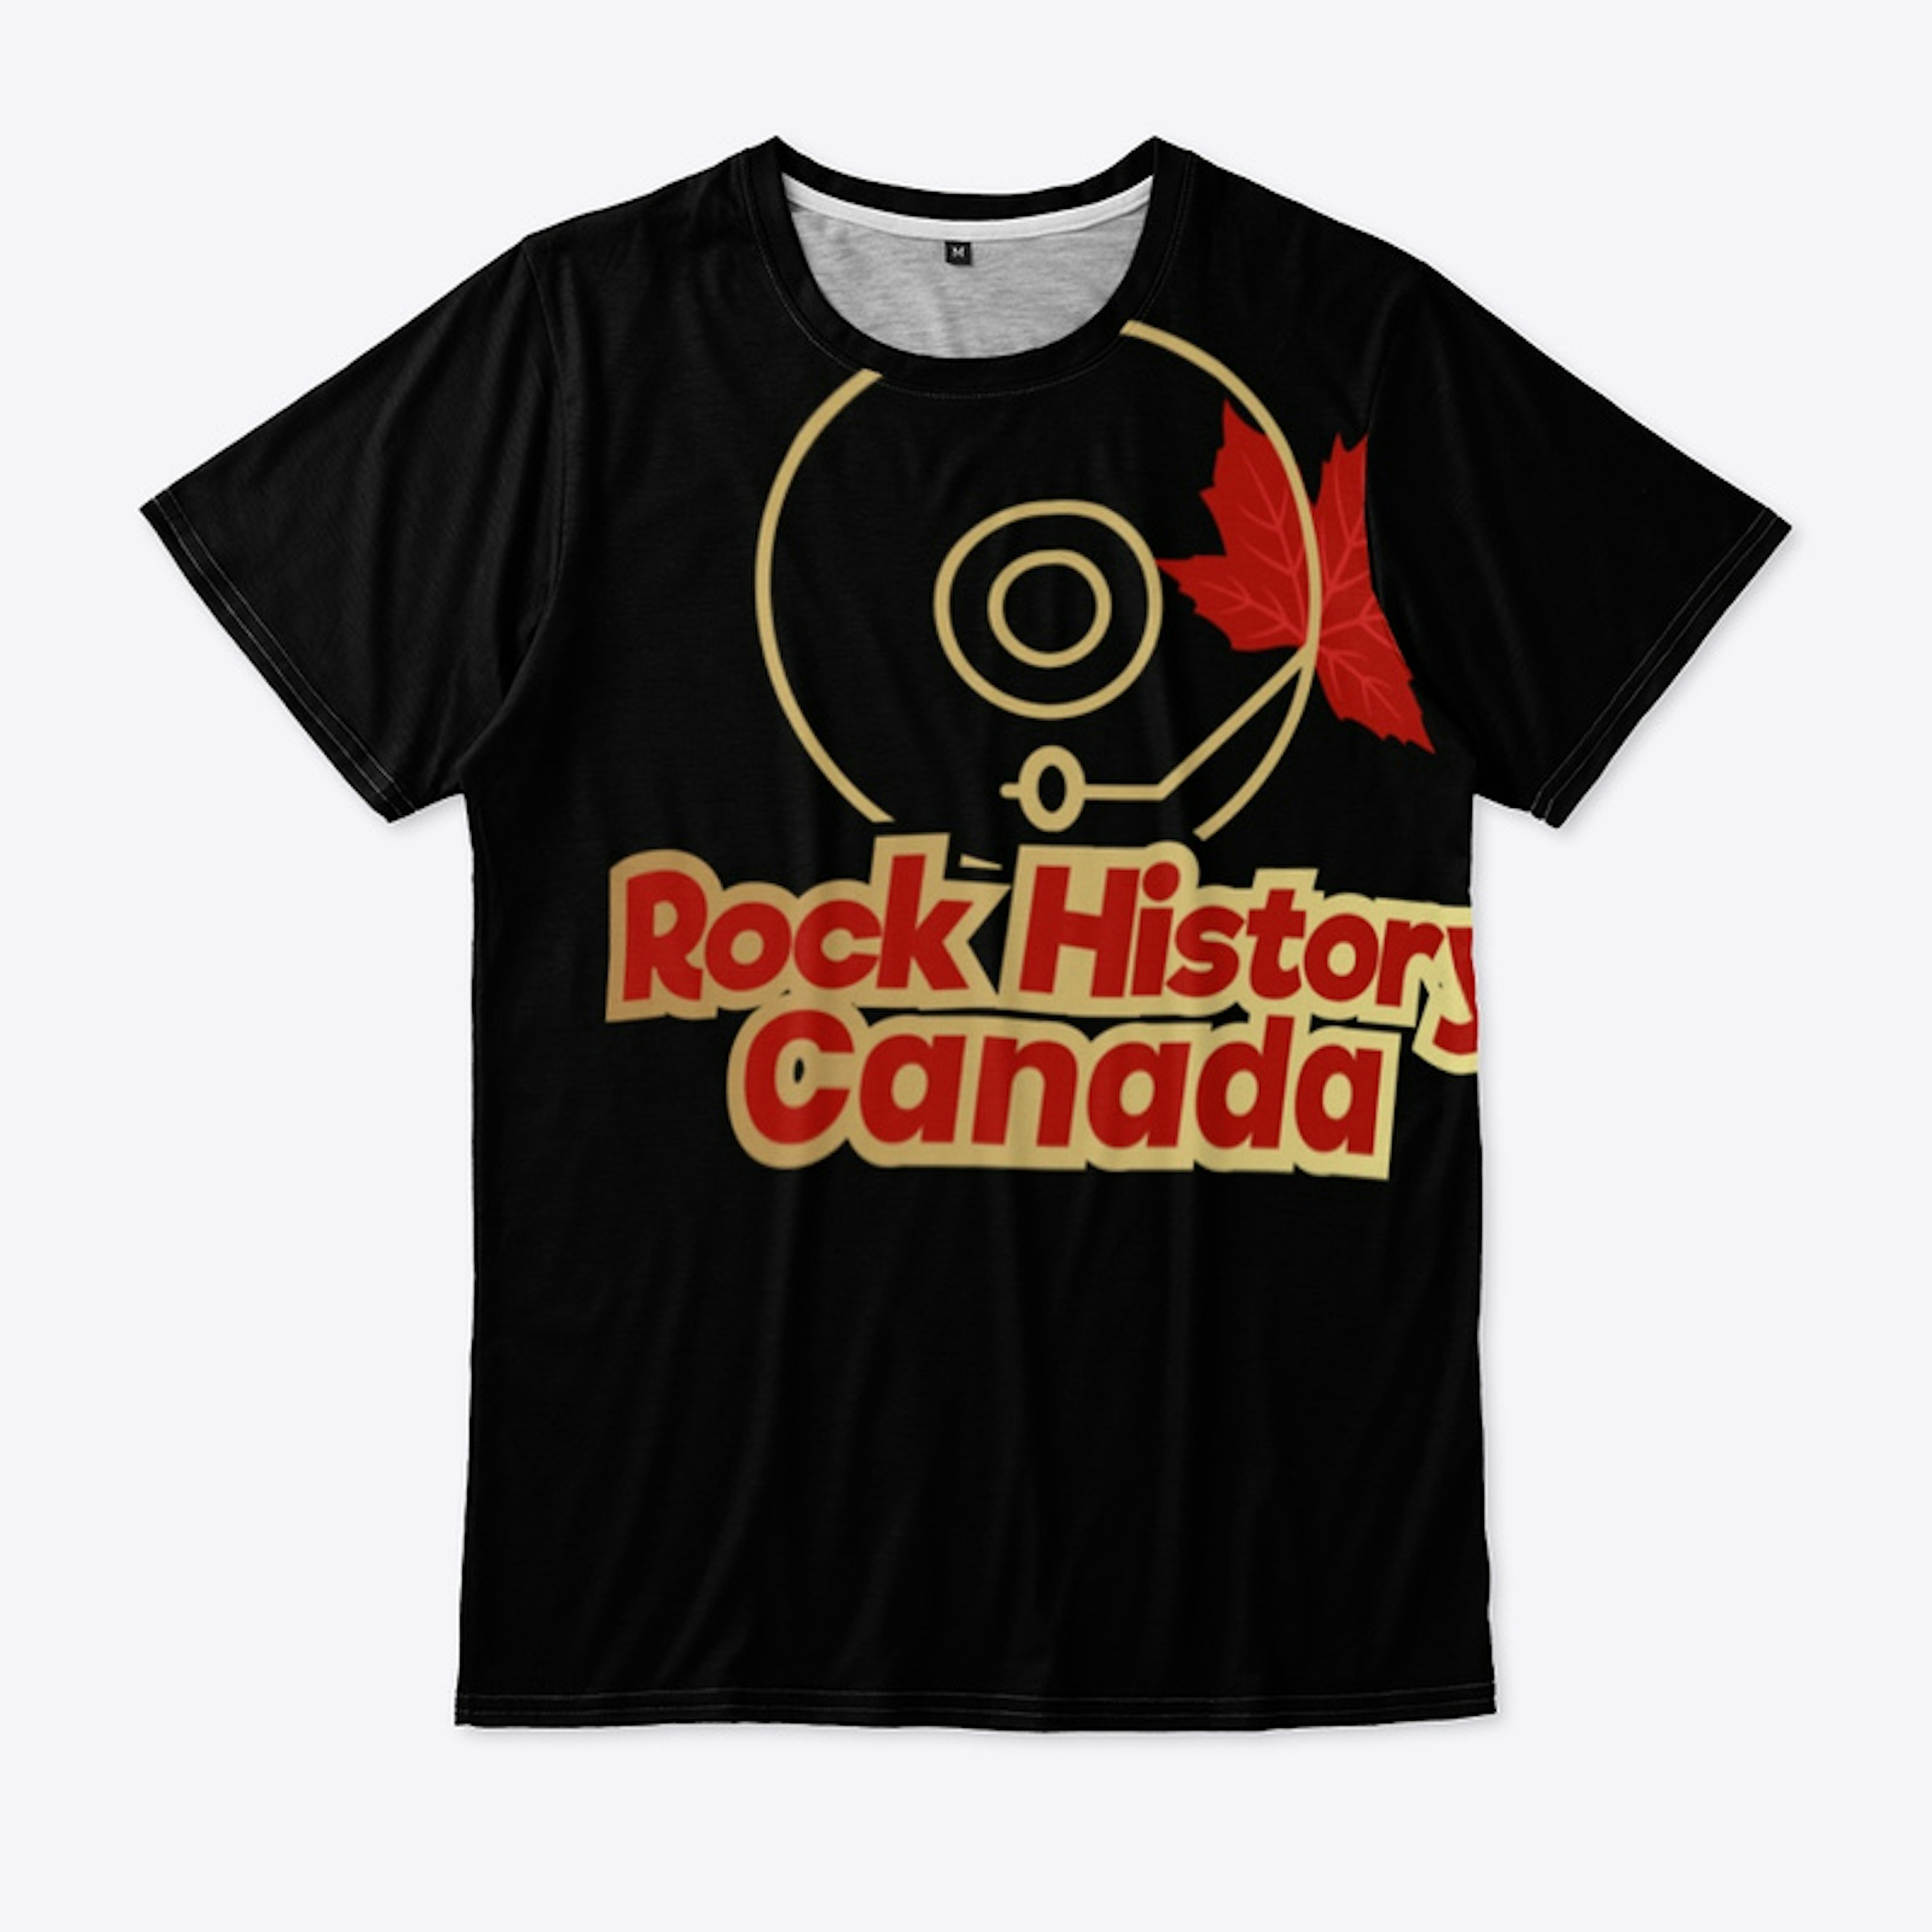 More cool "Rock History Canada" mercy